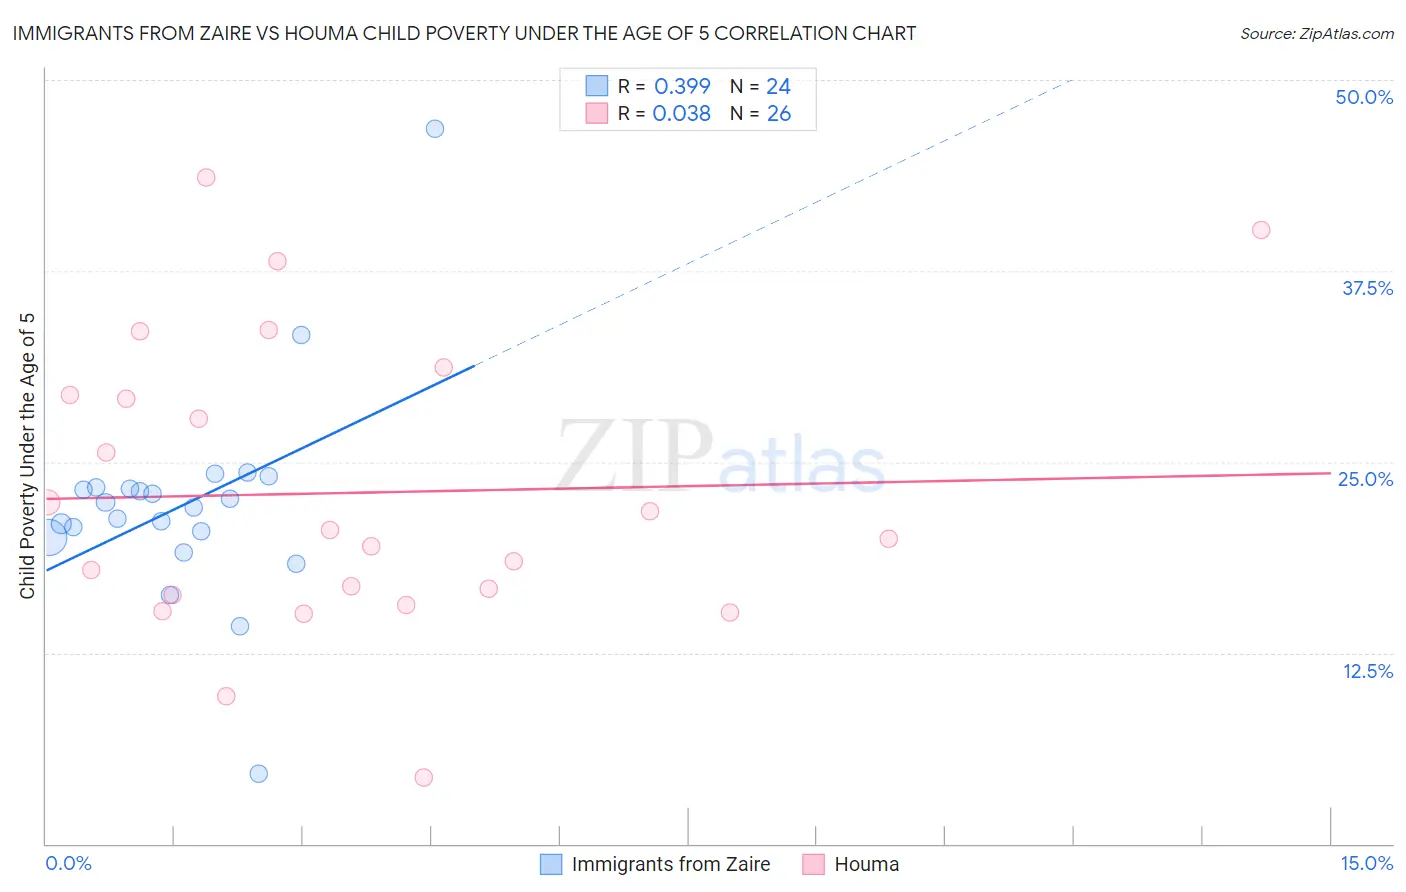 Immigrants from Zaire vs Houma Child Poverty Under the Age of 5